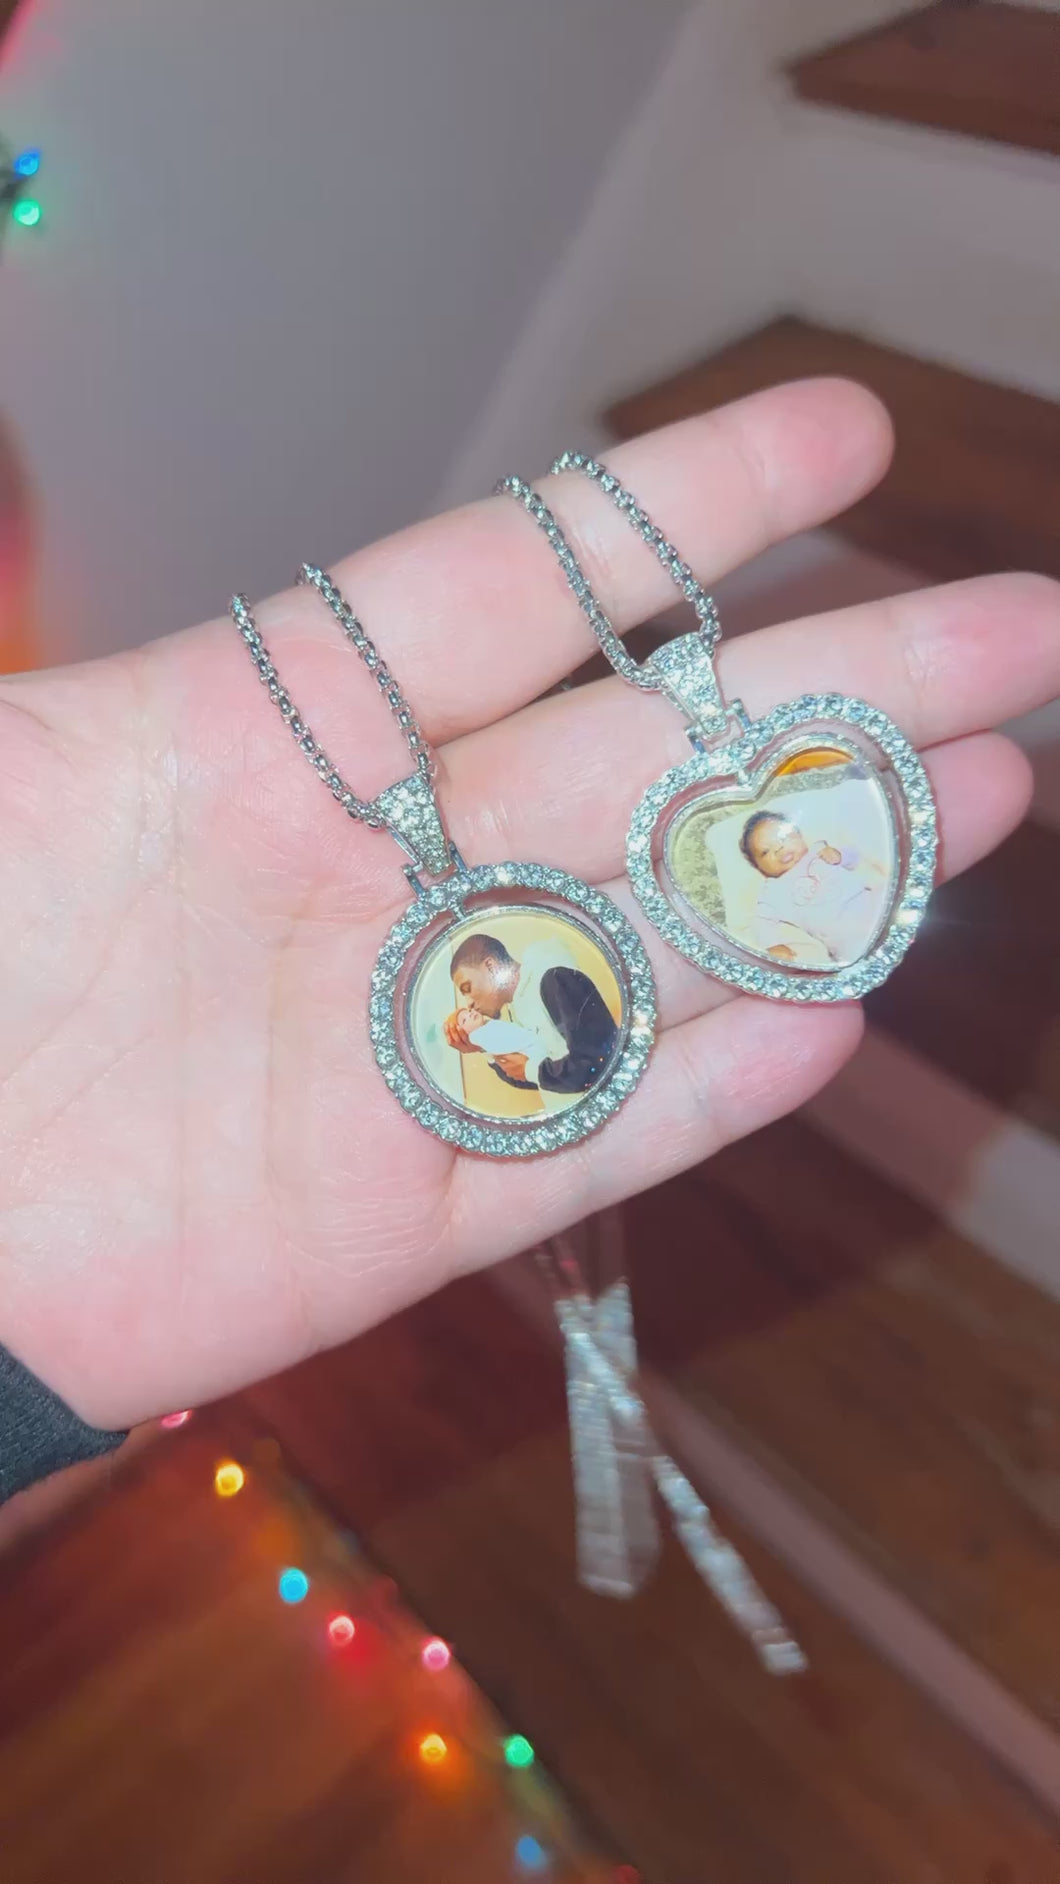 Double sided Photo pendant EMAIL PHOTO OR SEND ON SOCIAL MEDIA!